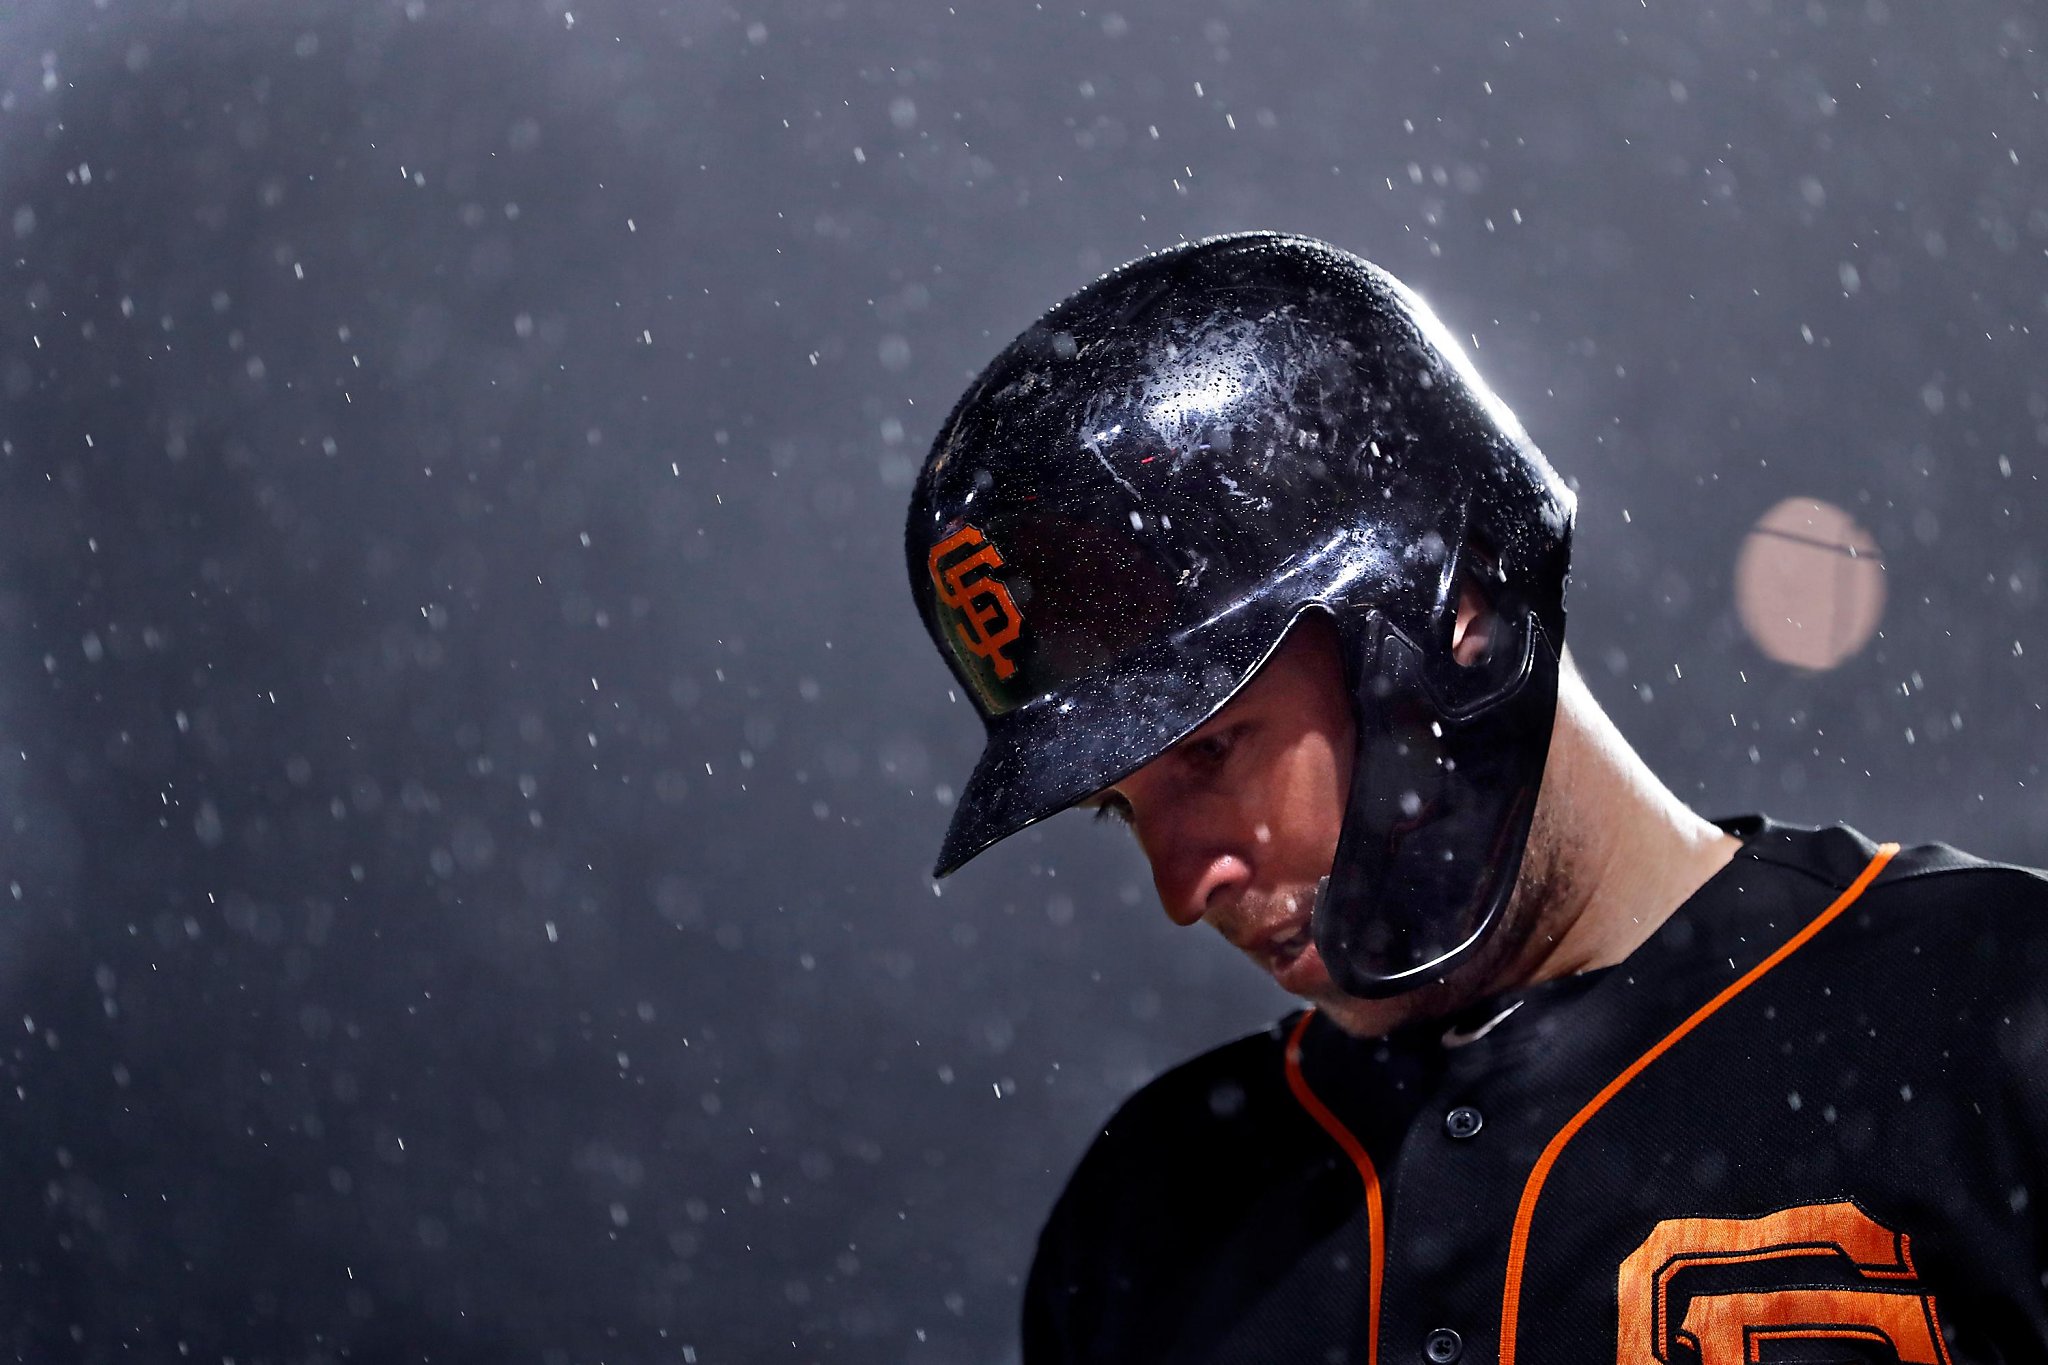 San Francisco Giants player Buster Posey surprises fan that lost home in  California Creek Fire